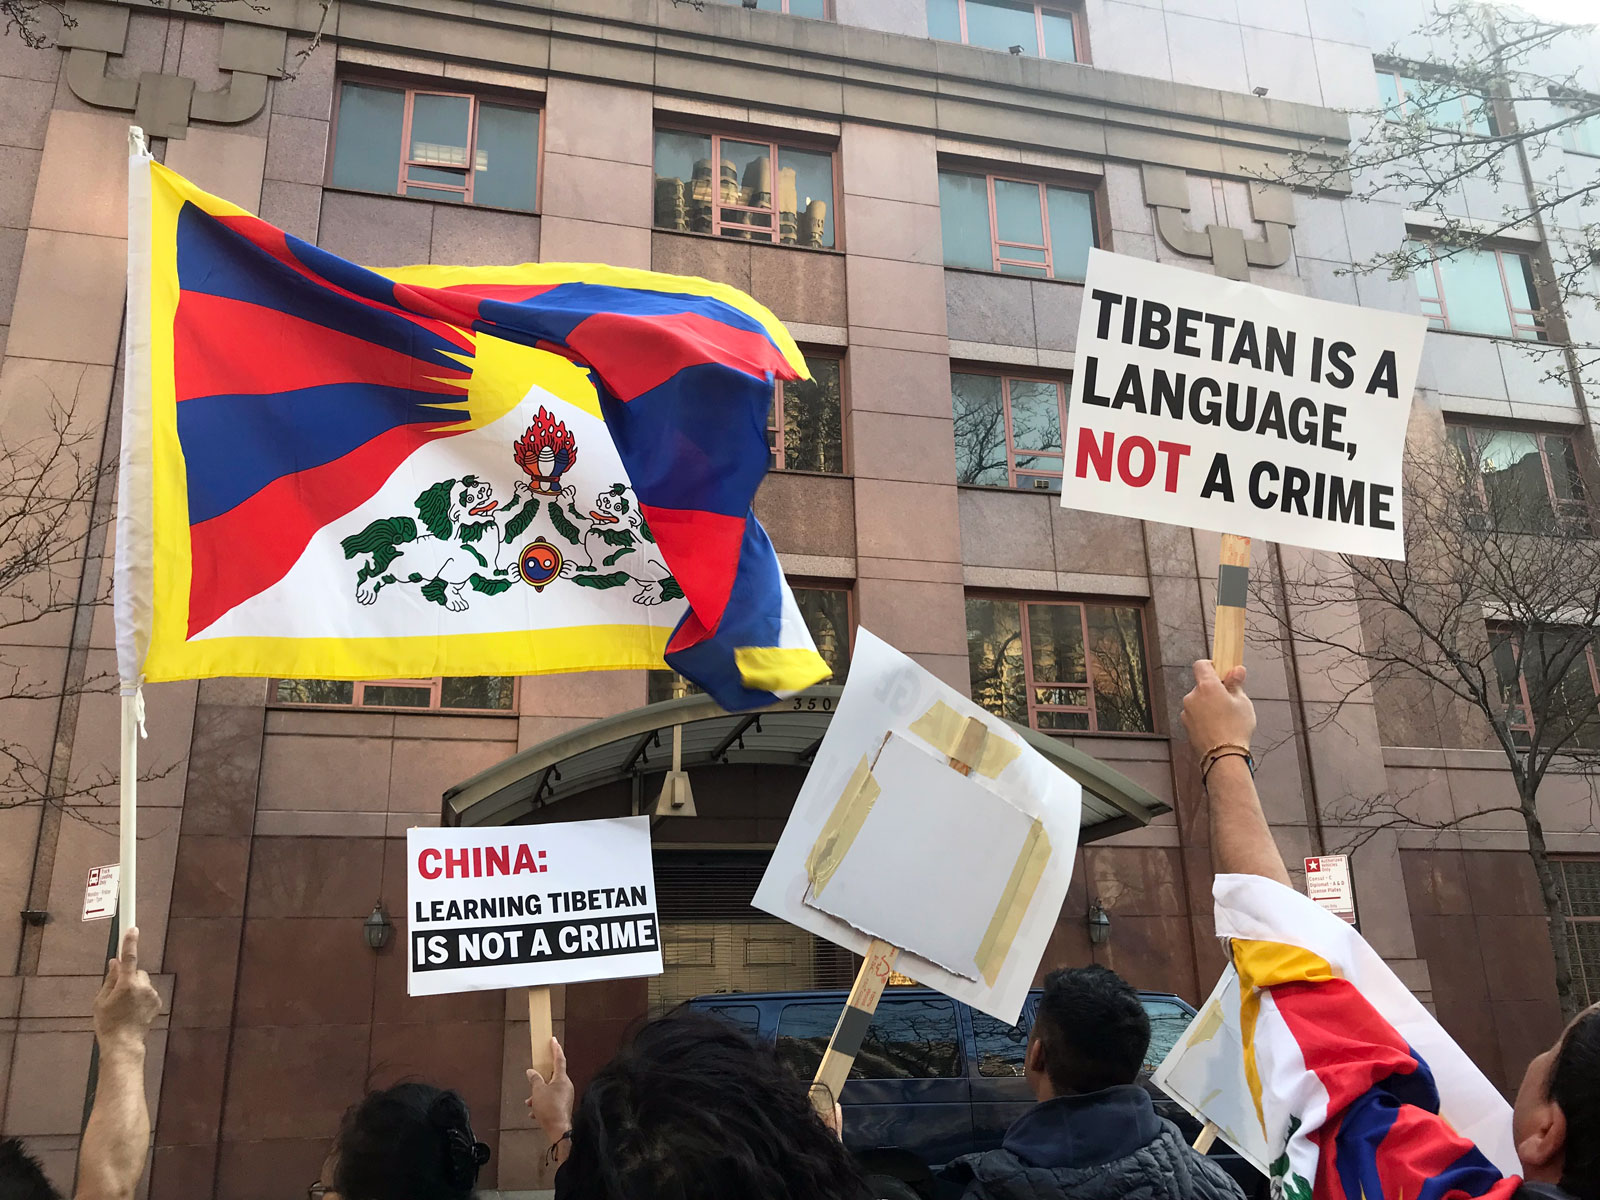 Take action – tell your representatives to stand up for Tibet at the UN